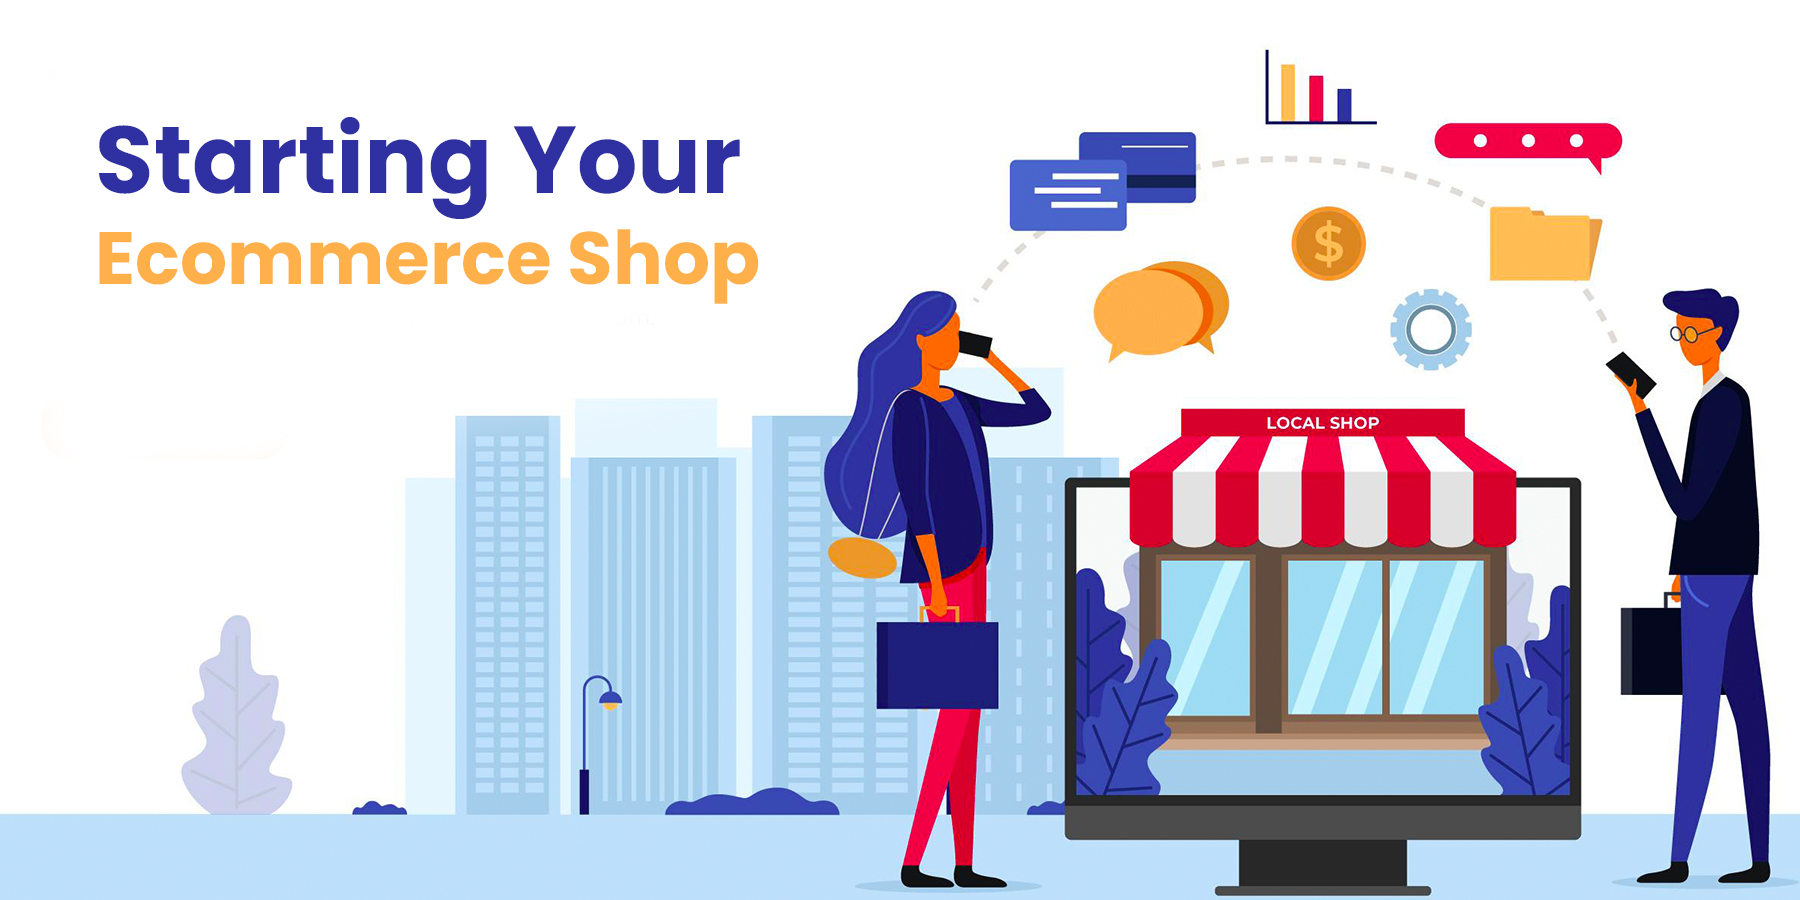 Starting Your Ecommerce Shop